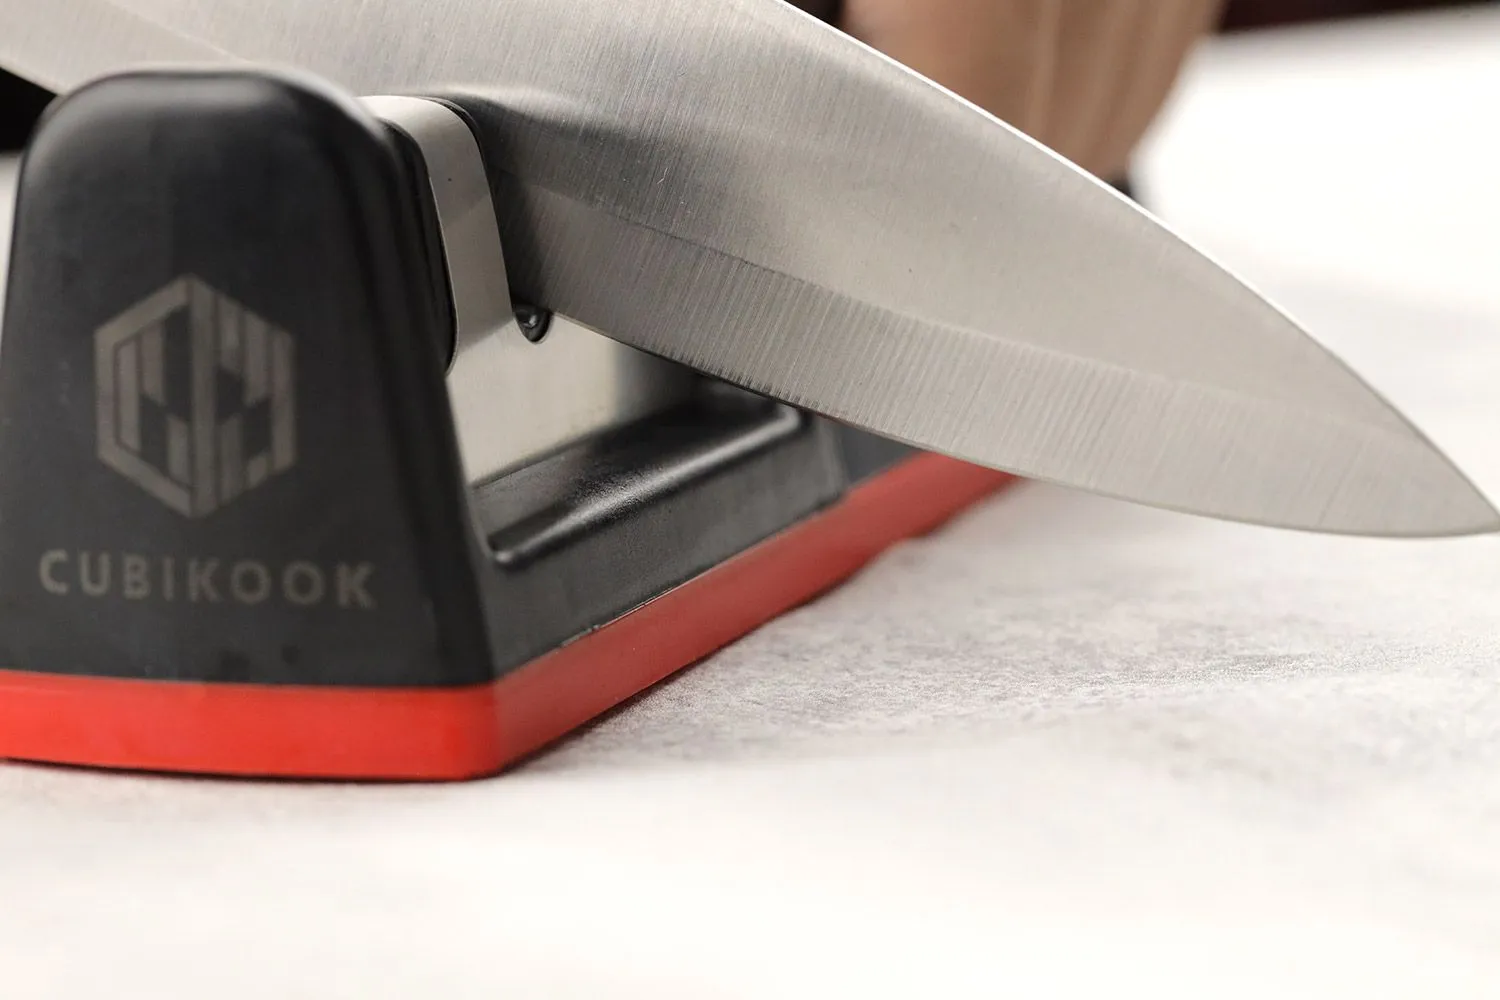 Cubikook Kitchen Knife Sharpener - Complete 3-stage Knife Sharpener CS-T01  with Diamond Dust Rods, Sturdy Design, Non-slip Base Pat, Easy and Safe to